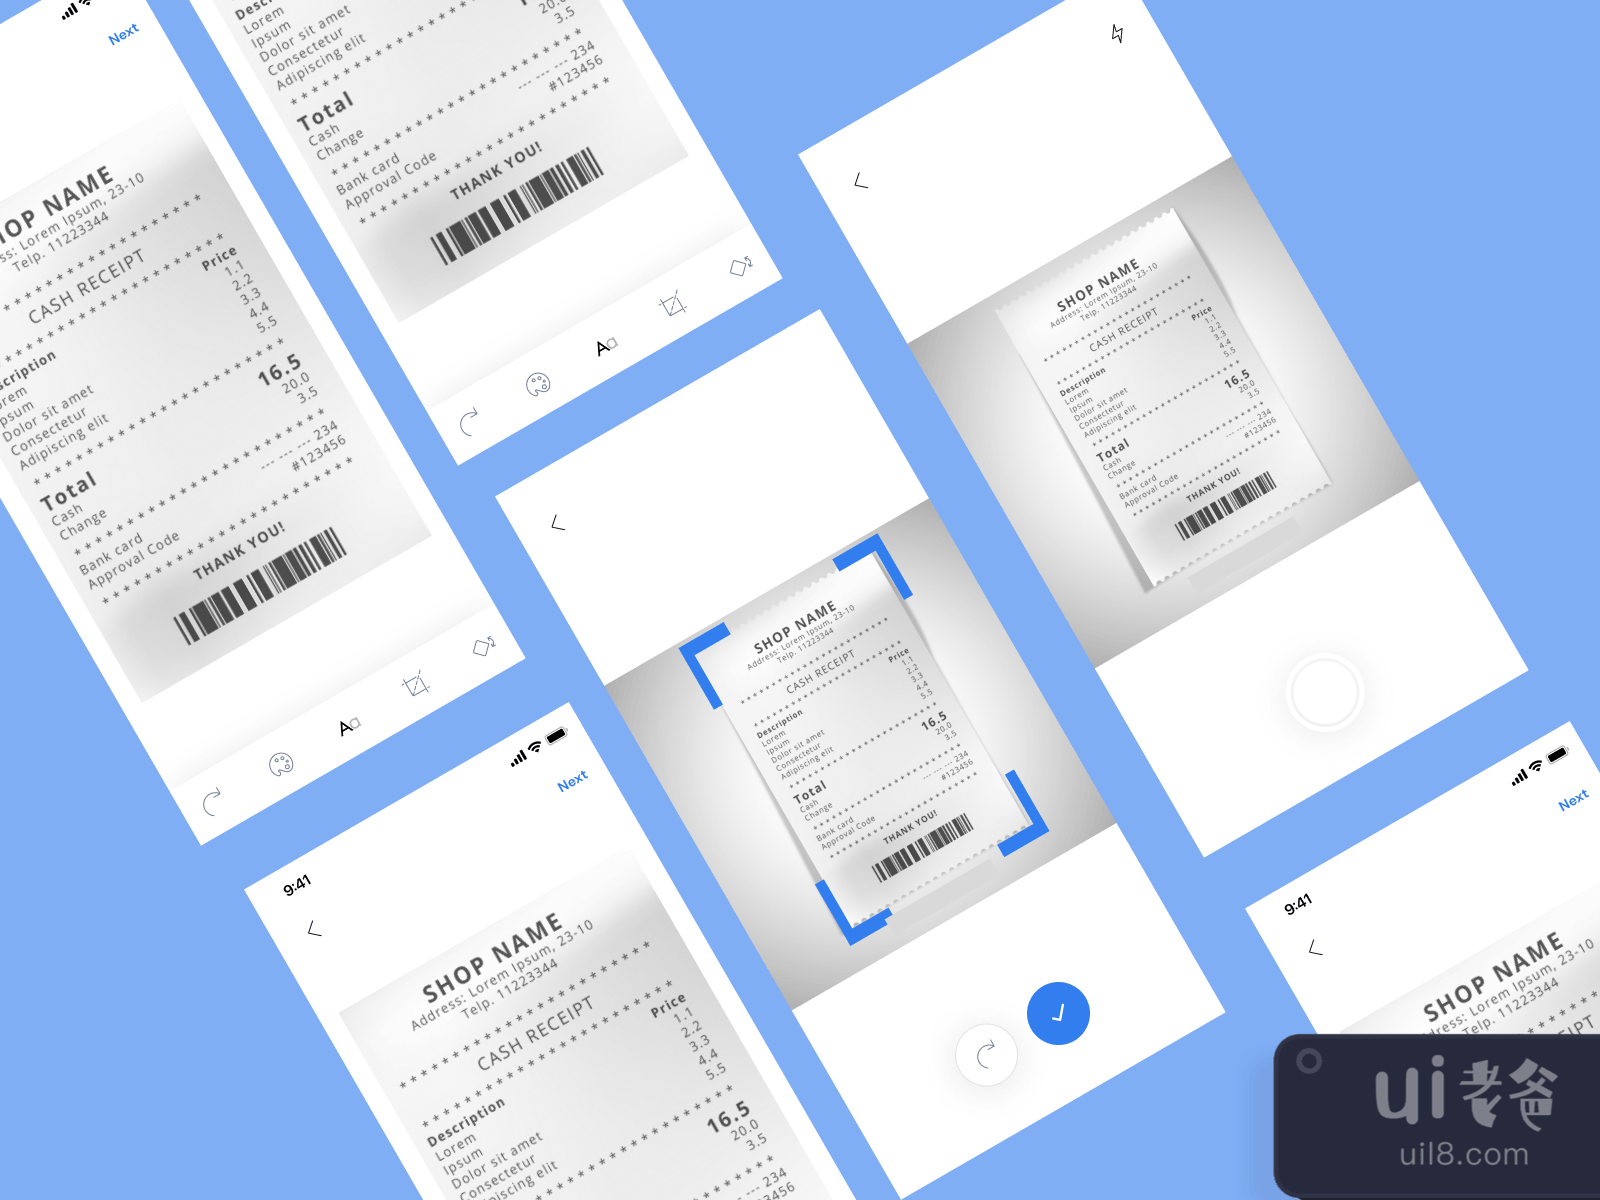 Document Scanner App for Figma and Adobe XD No 3